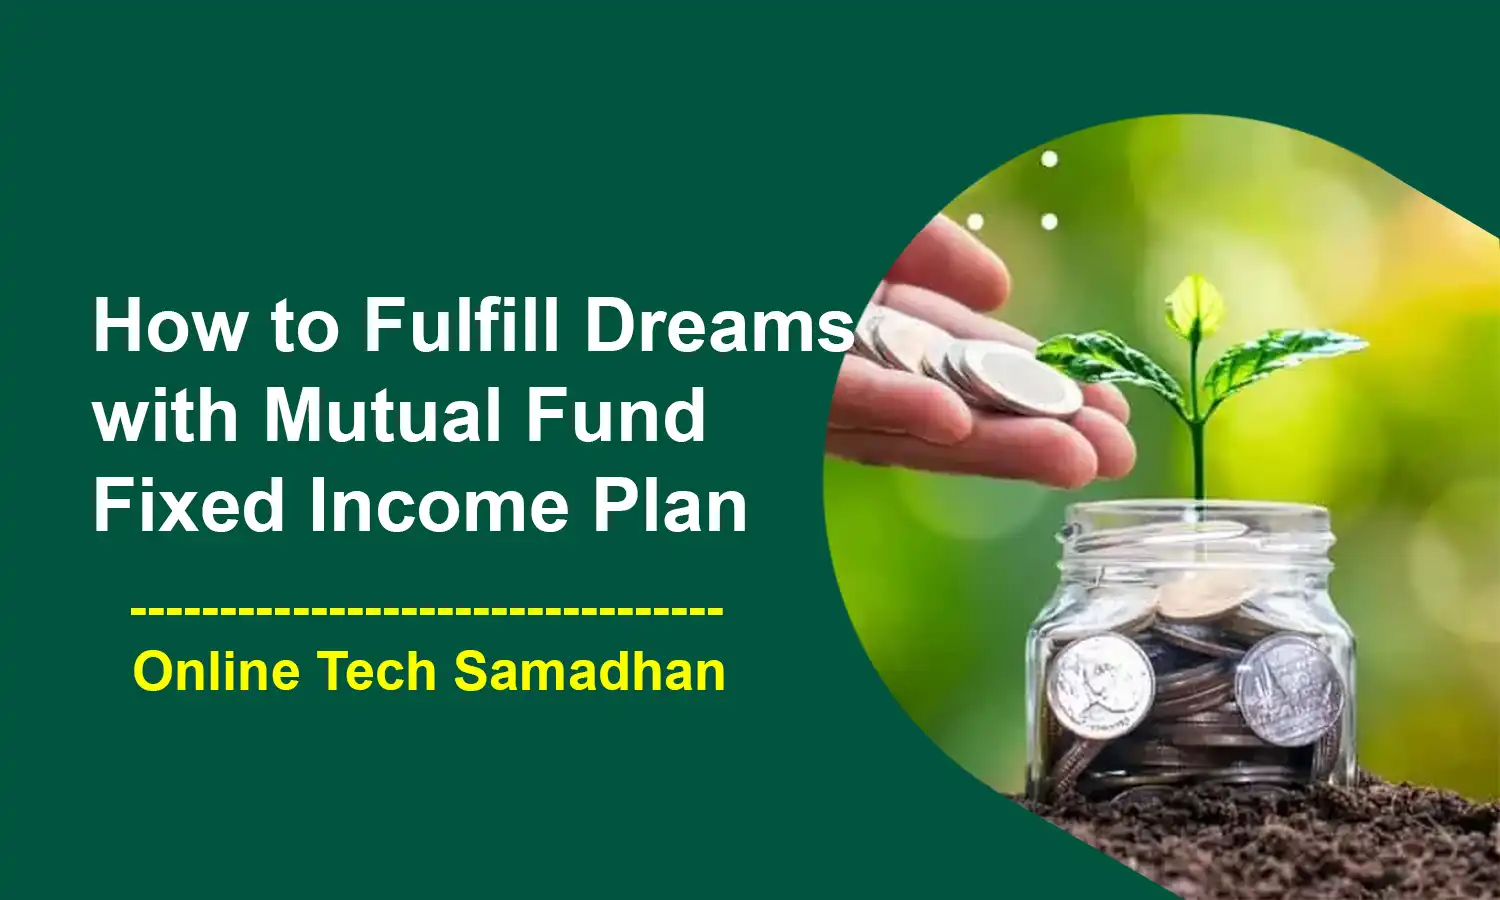 How to Fulfill Dreams with Mutual Fund Fixed Income Plan